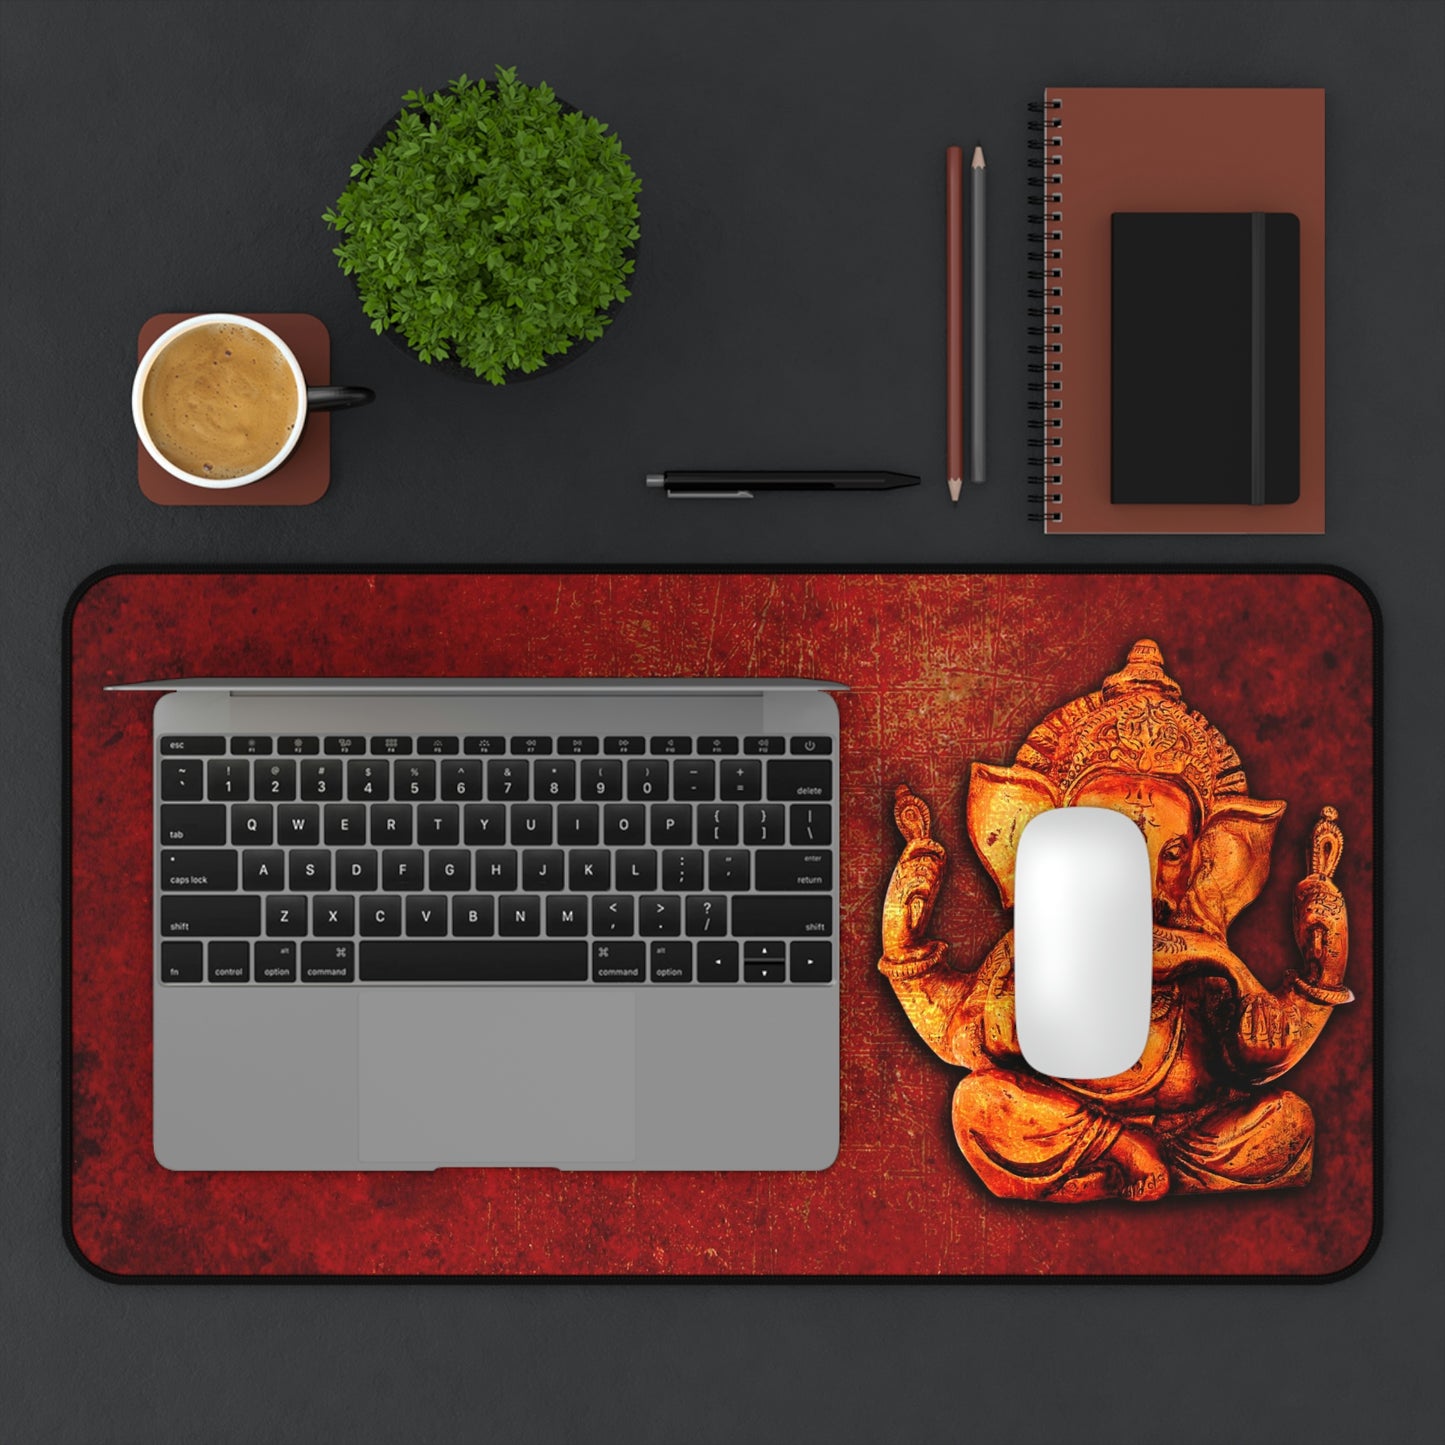 Gold Ganesha on Lava Red Background Print on Neoprene Desk Mat 12 by 22 with laptop